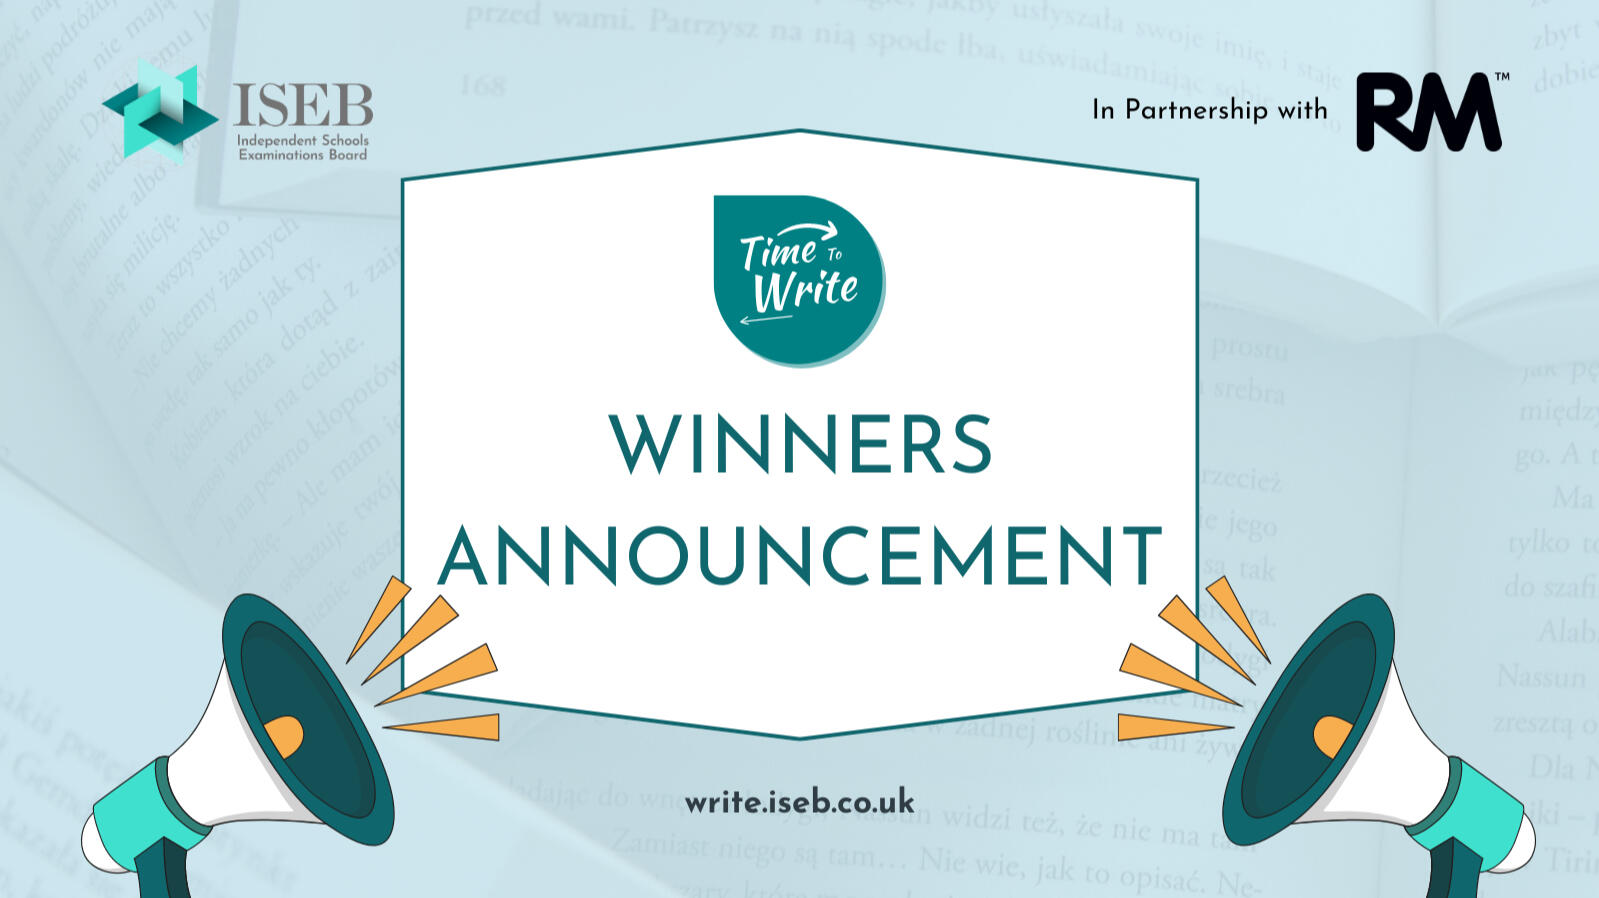 creative writing competition titles